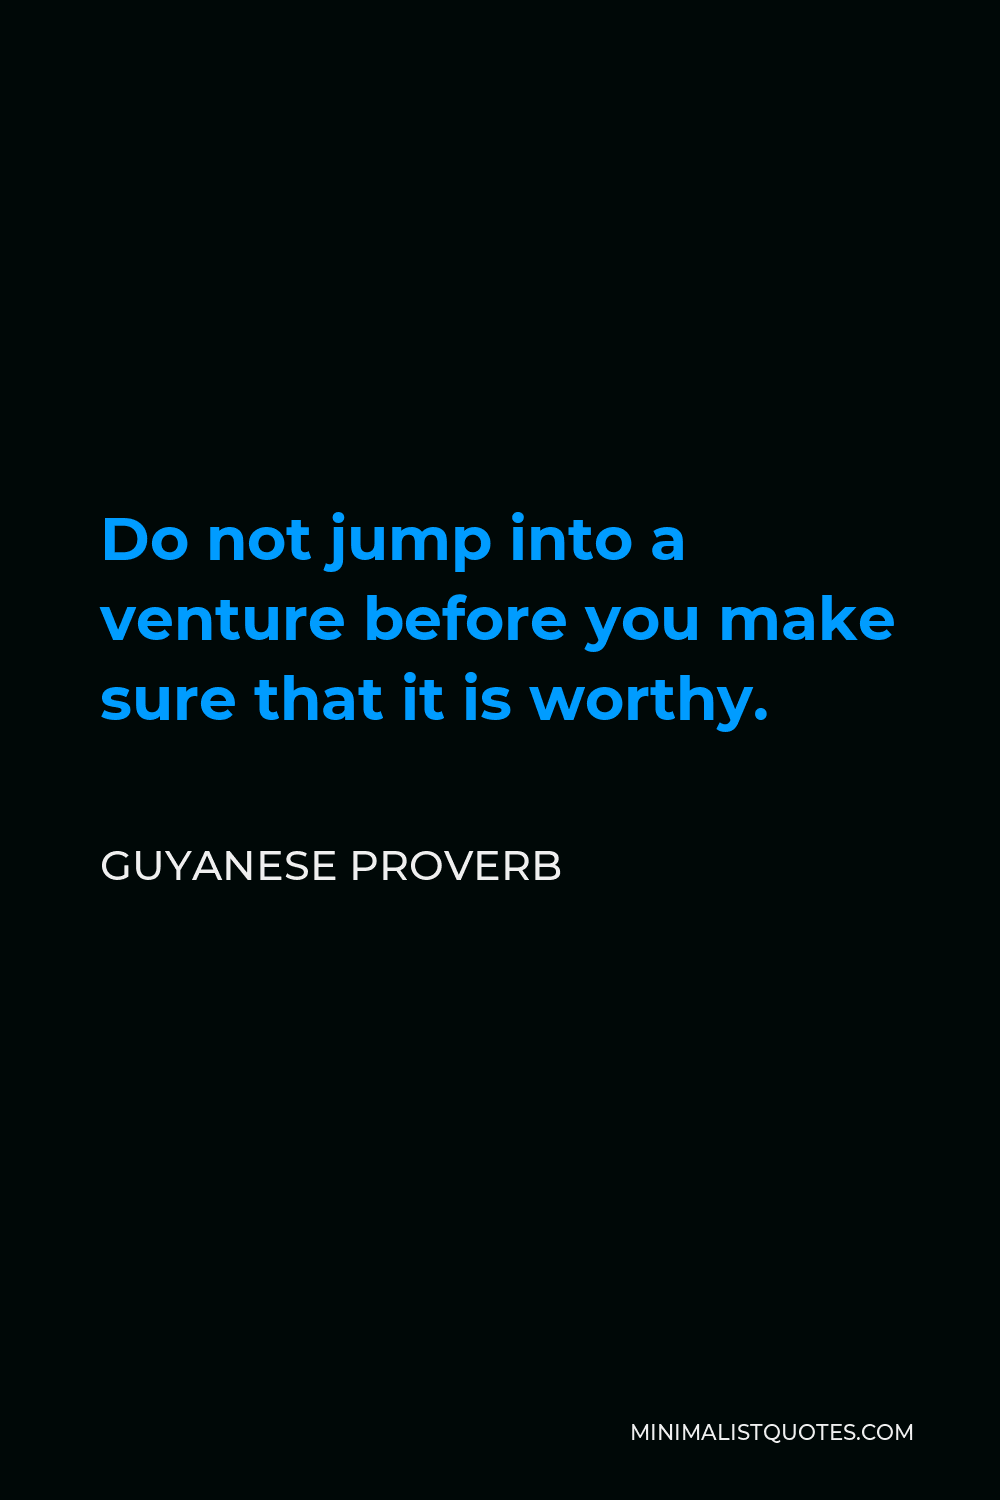 Guyanese Proverb Quote - Do not jump into a venture before you make sure that it is worthy.